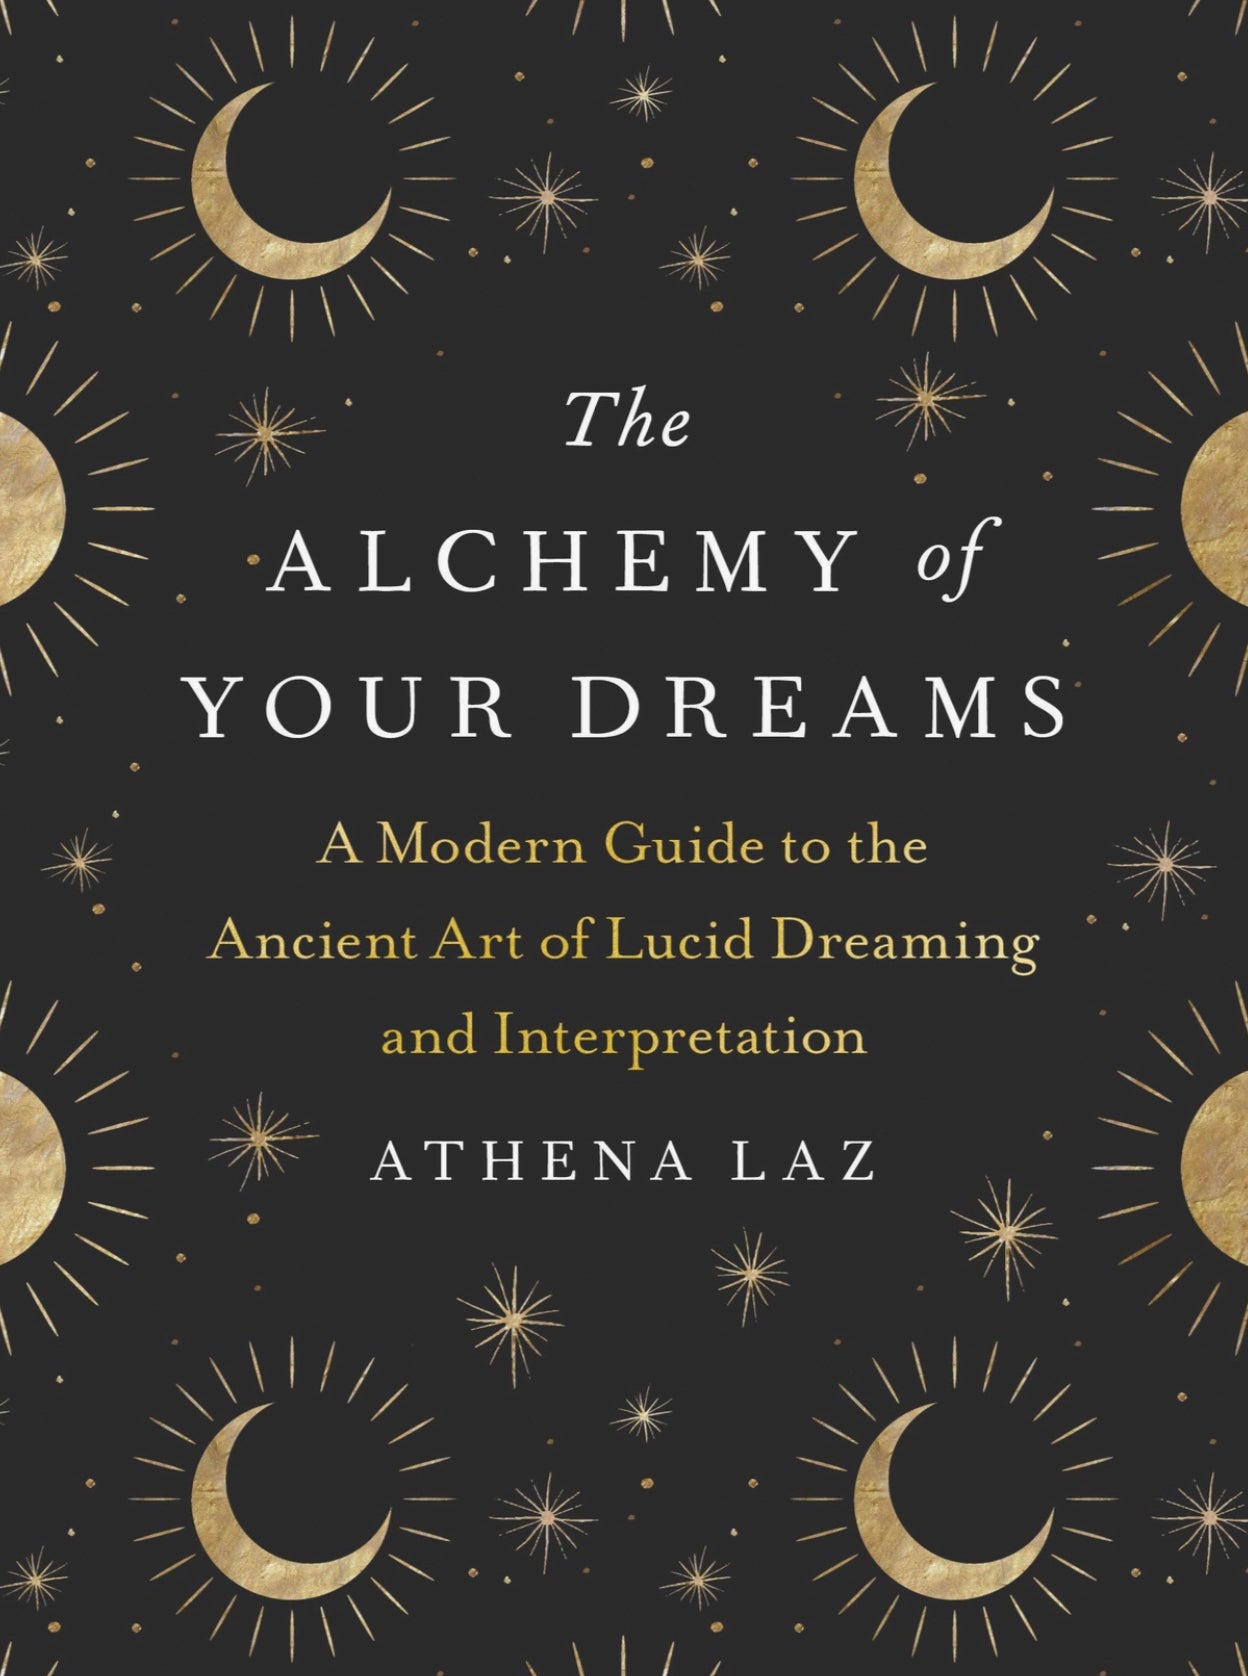 alchemy of your dreams : the ancient art of lucid dreaming